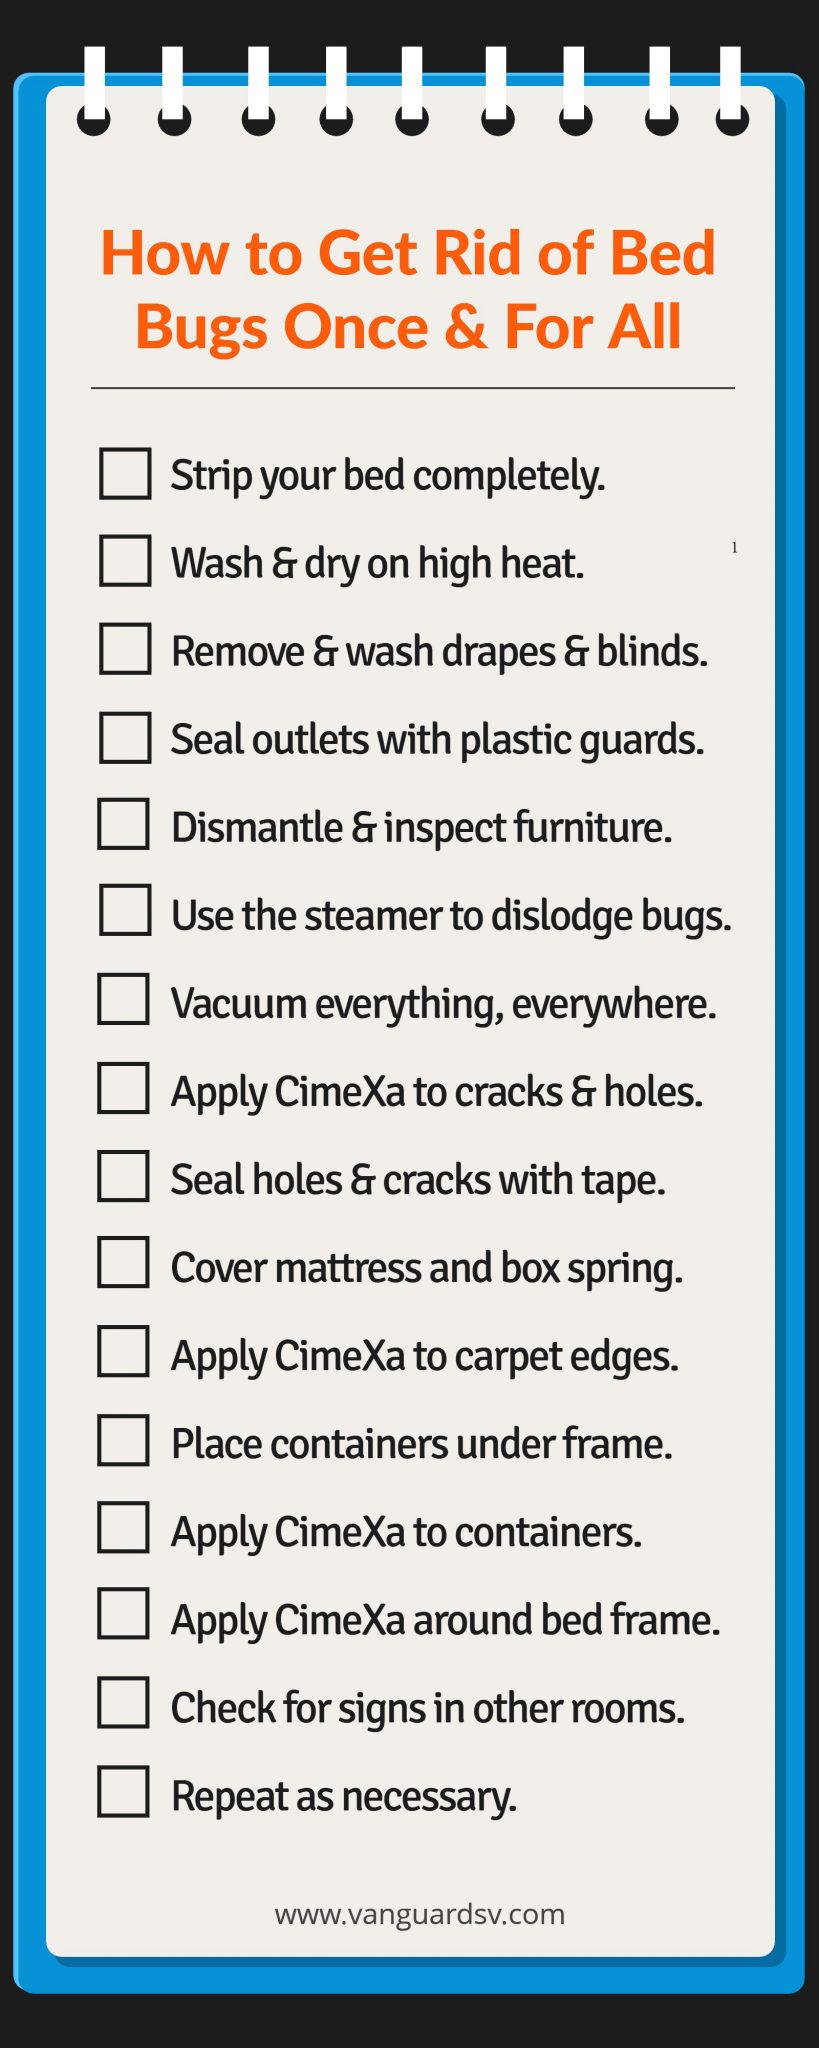 Janitorial-Services-Tips-to-get-rid-of-Bed-Bugs-Infographic-Fresno-Visalia-Tulare-Clovis-Kingsburg-1